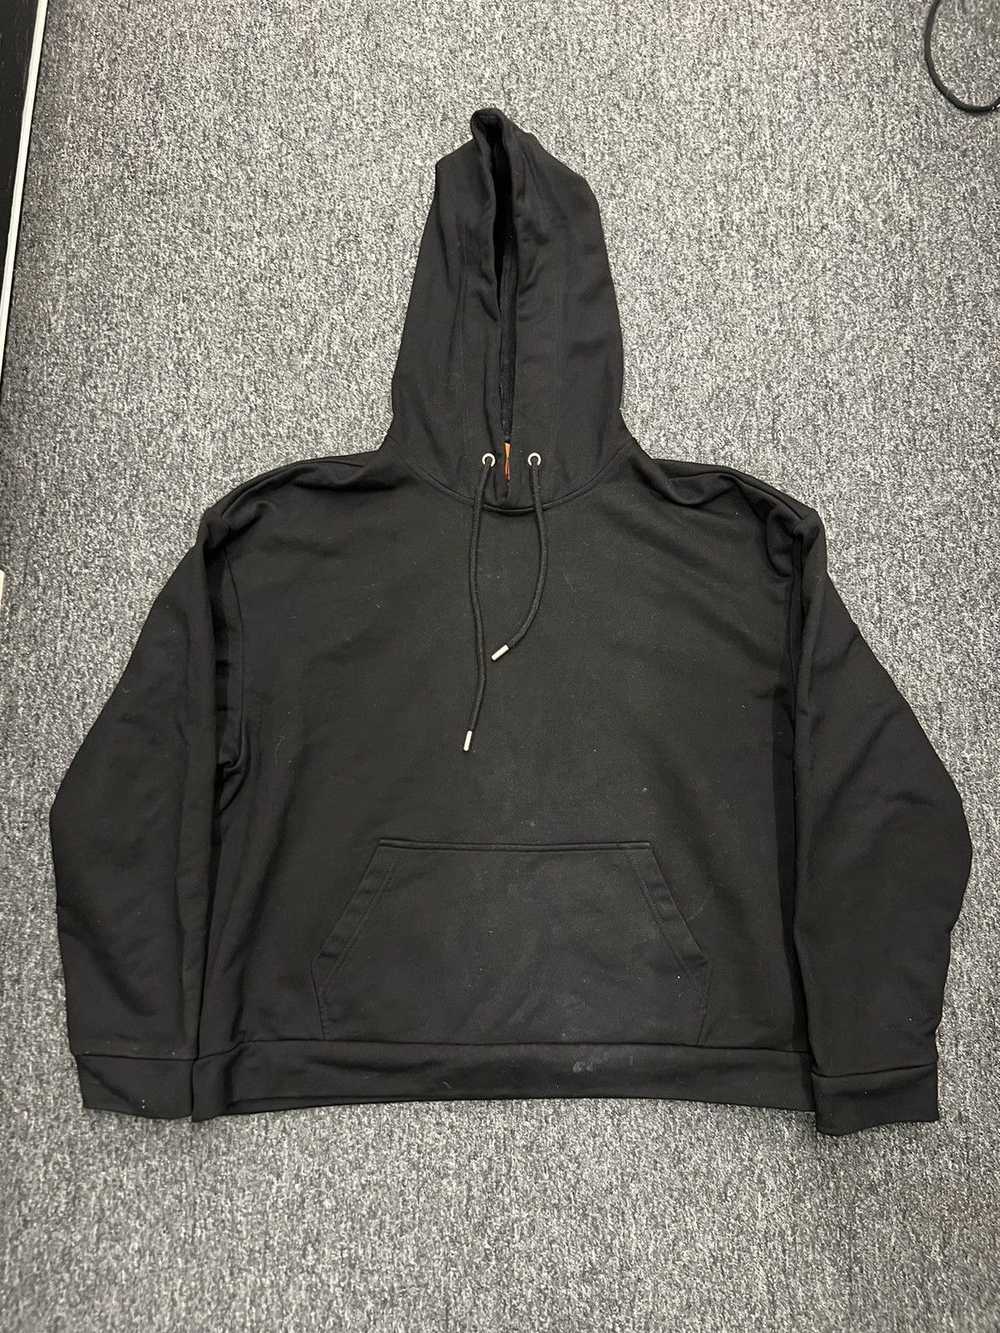 Who Decides War Signature Blank hoodie - image 2